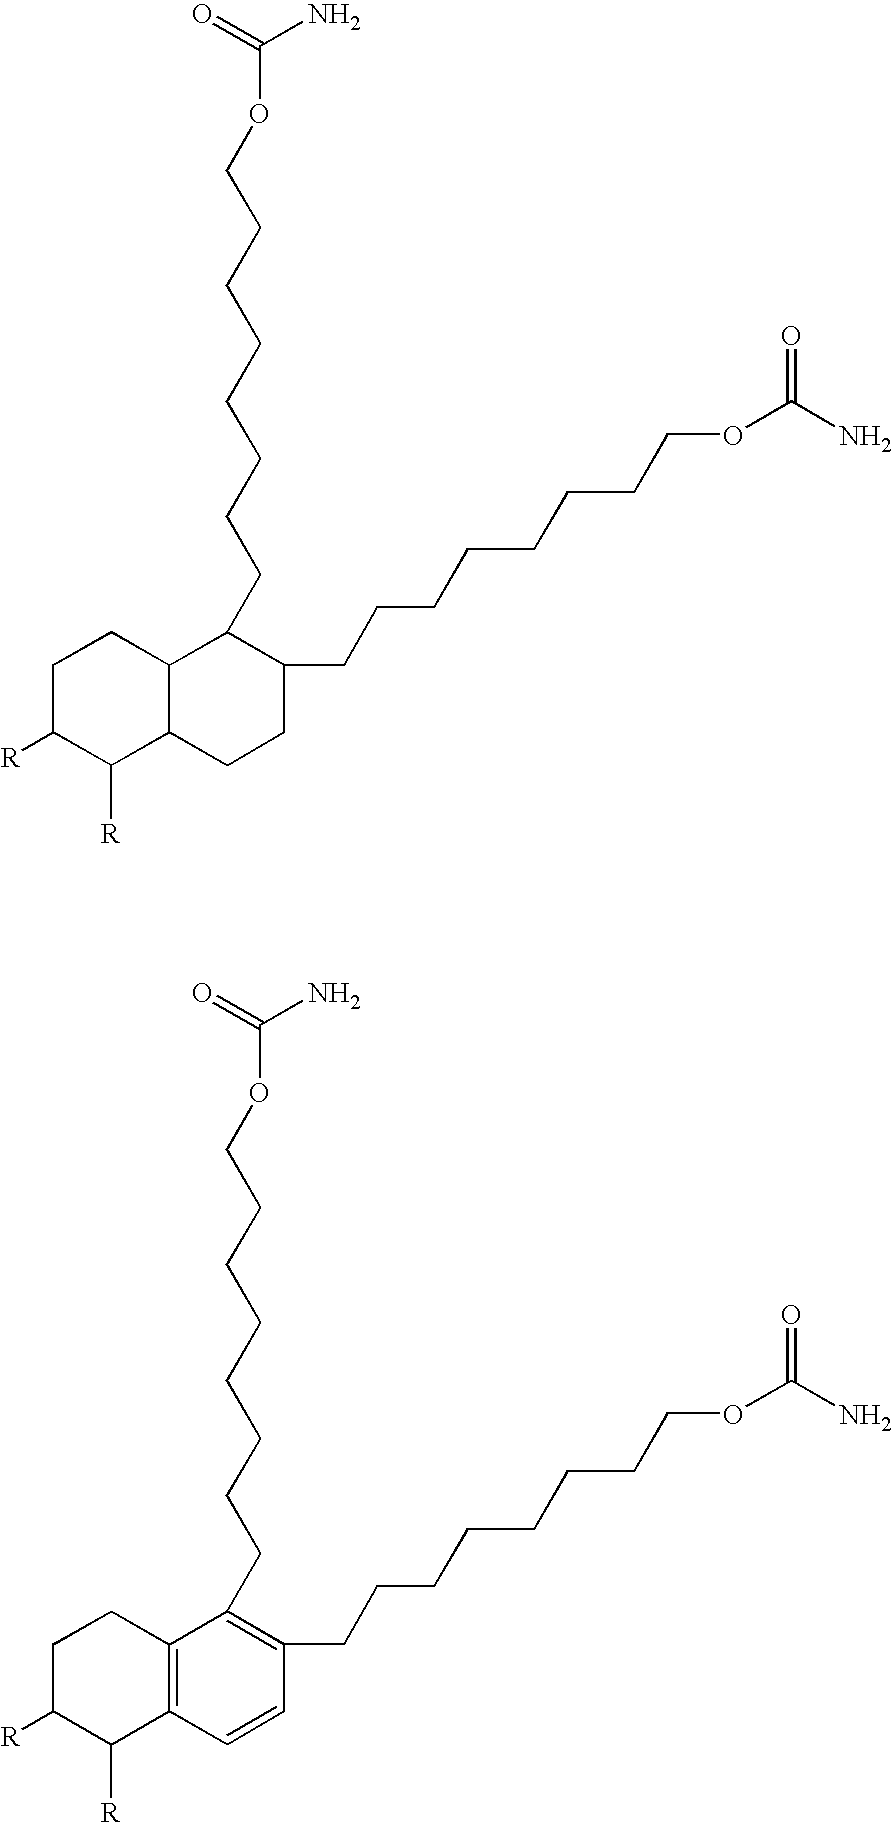 Coating composition containing crosslinkable monomeric difunctional compounds having at least thirty carbon atoms